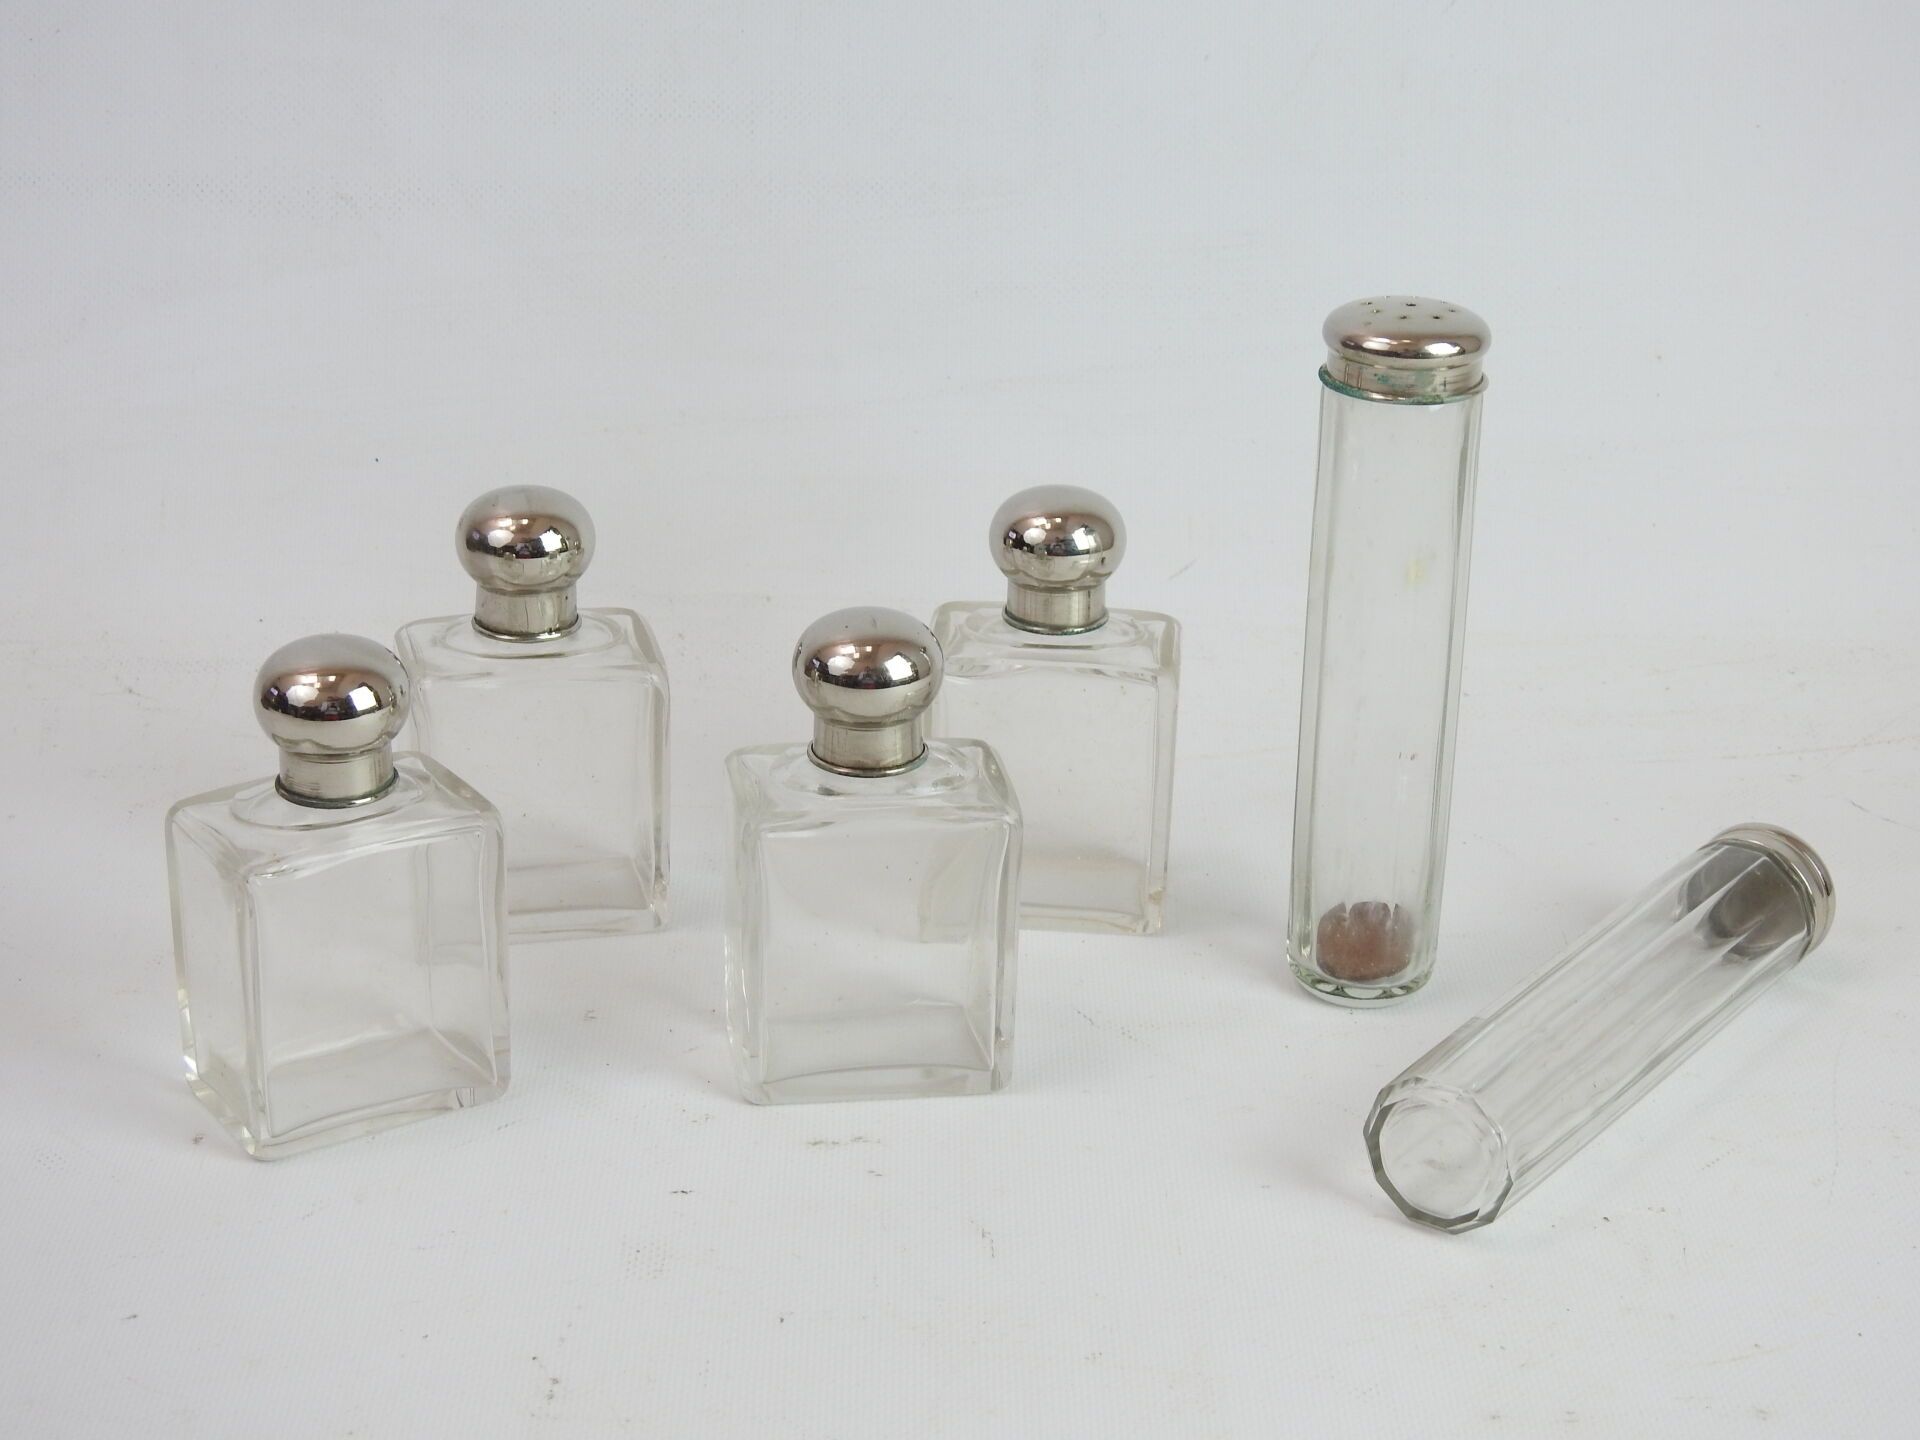 Null Glass and silver plated metal travel set. 9 pieces. Some wear and defects